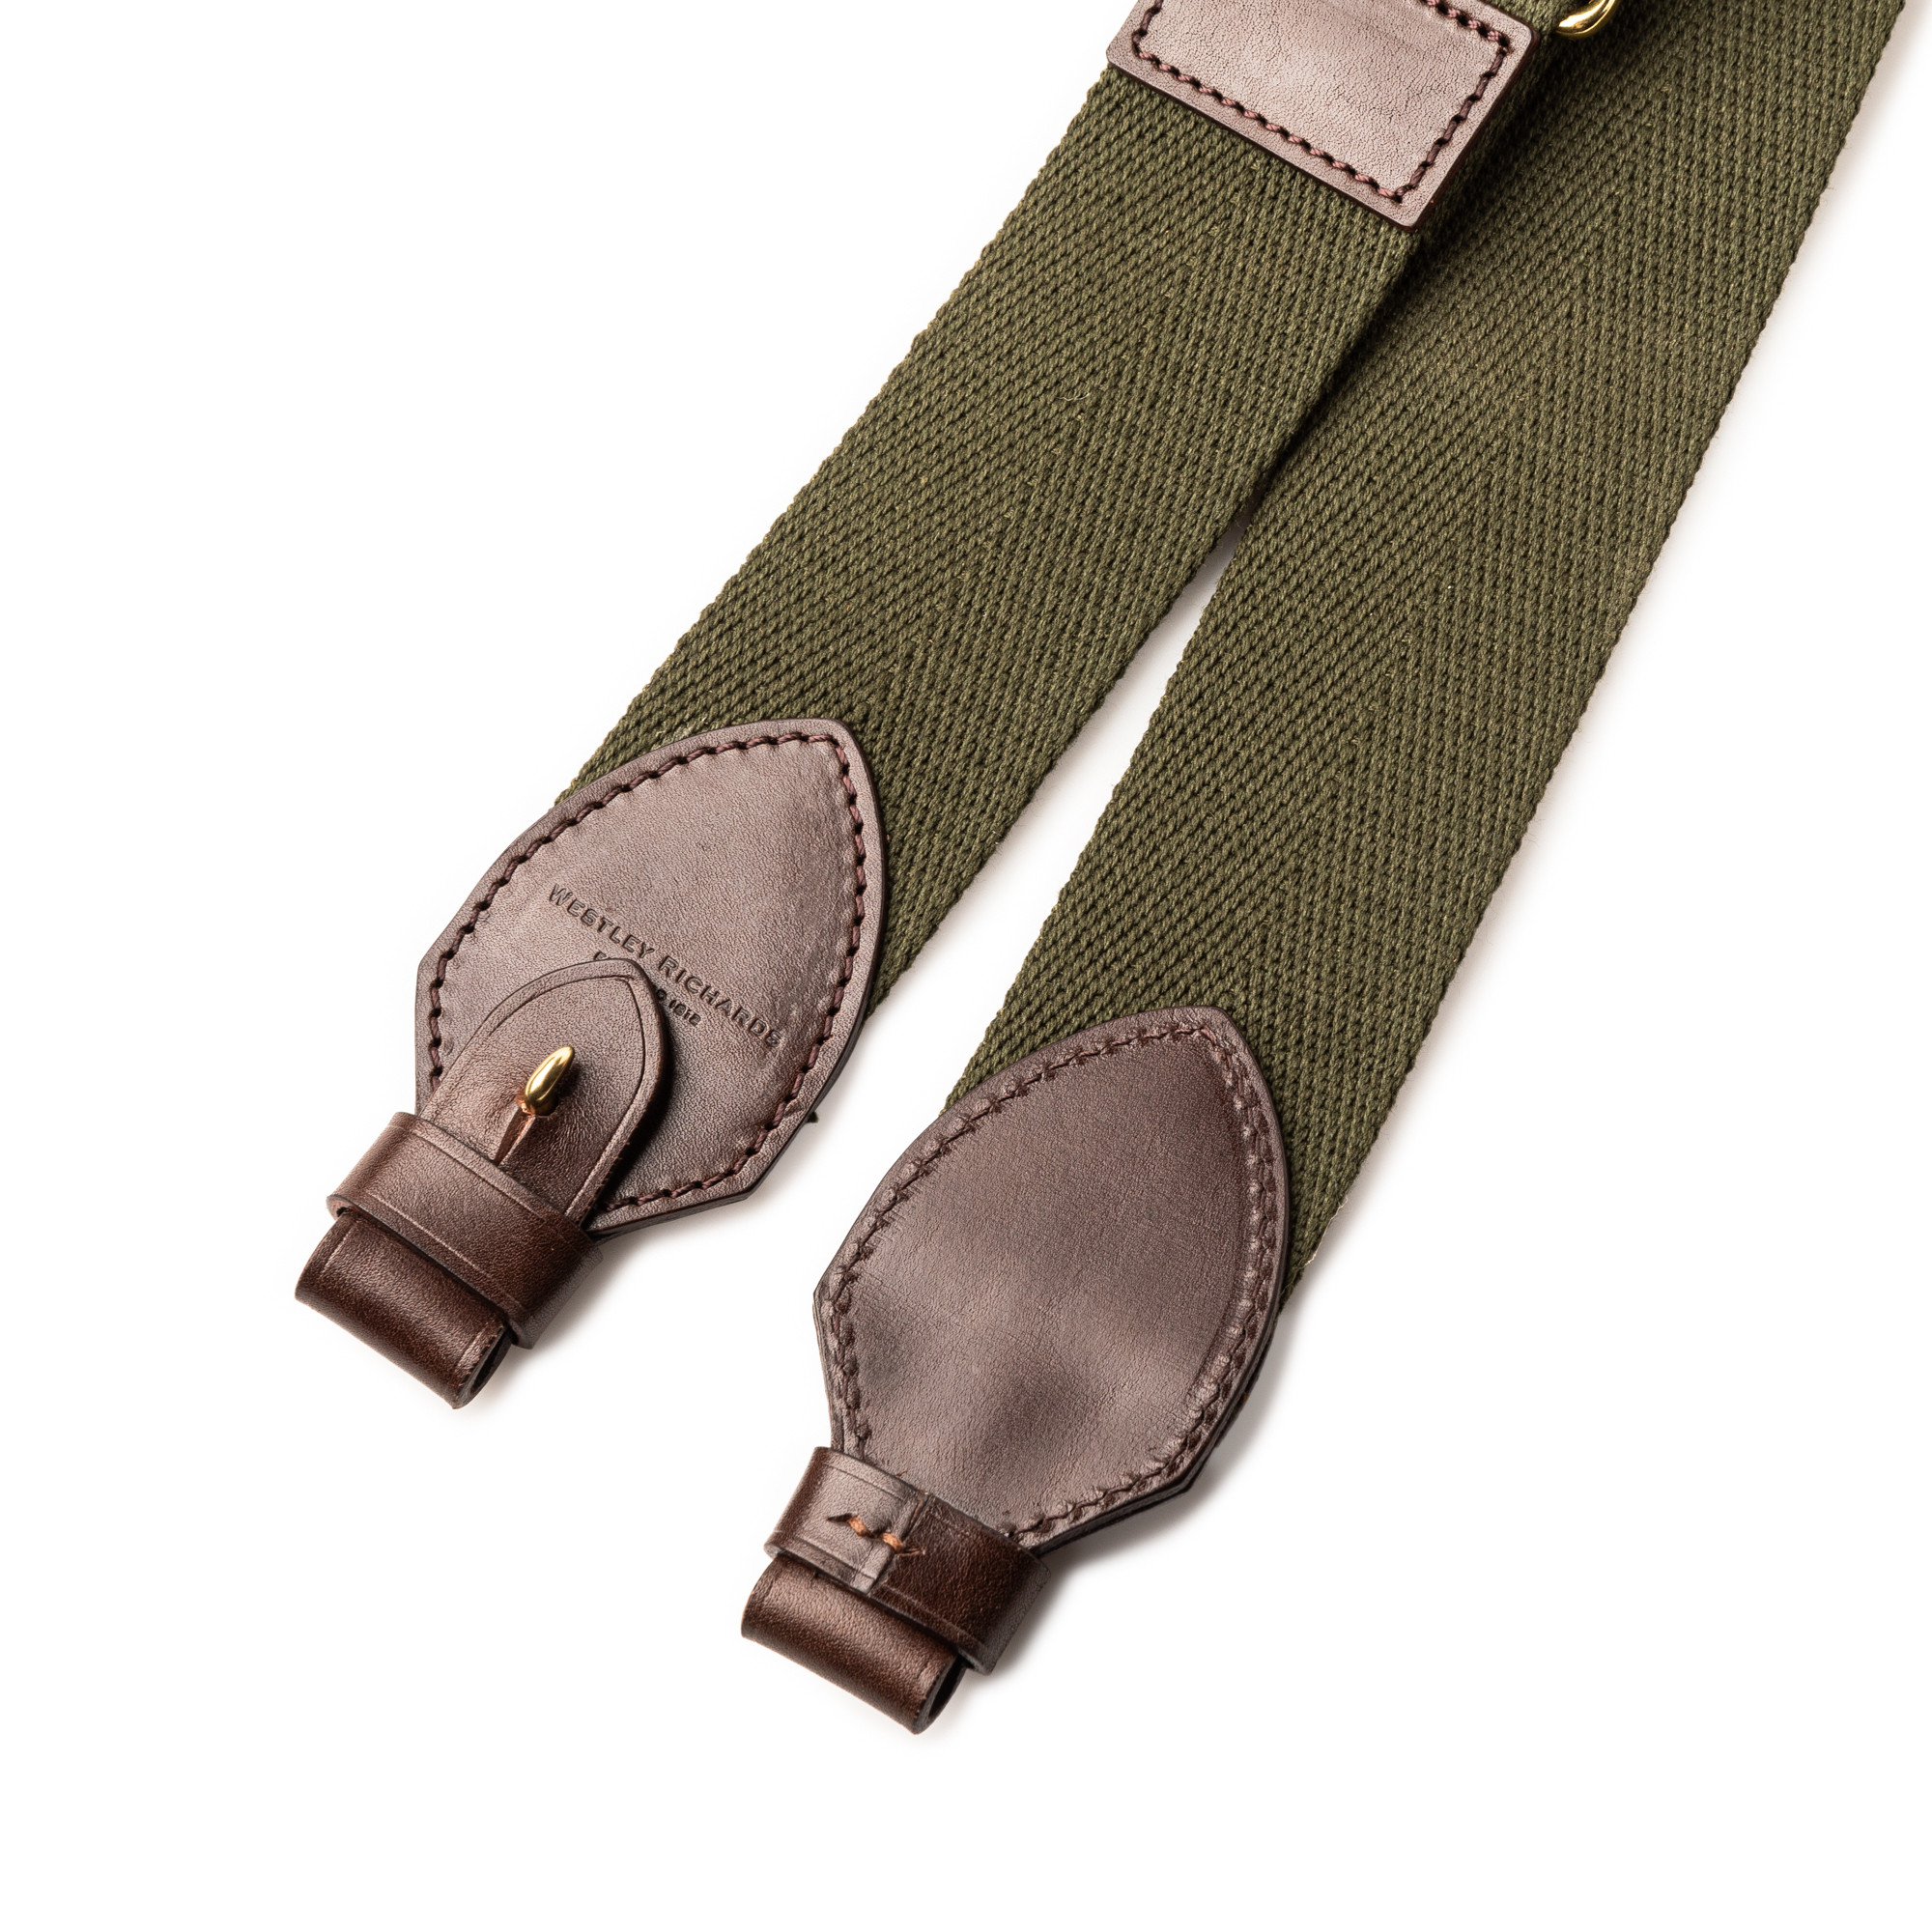 Shotgun Rifle Sling Strap Canvas Leather Stitched Hunting Shooting 